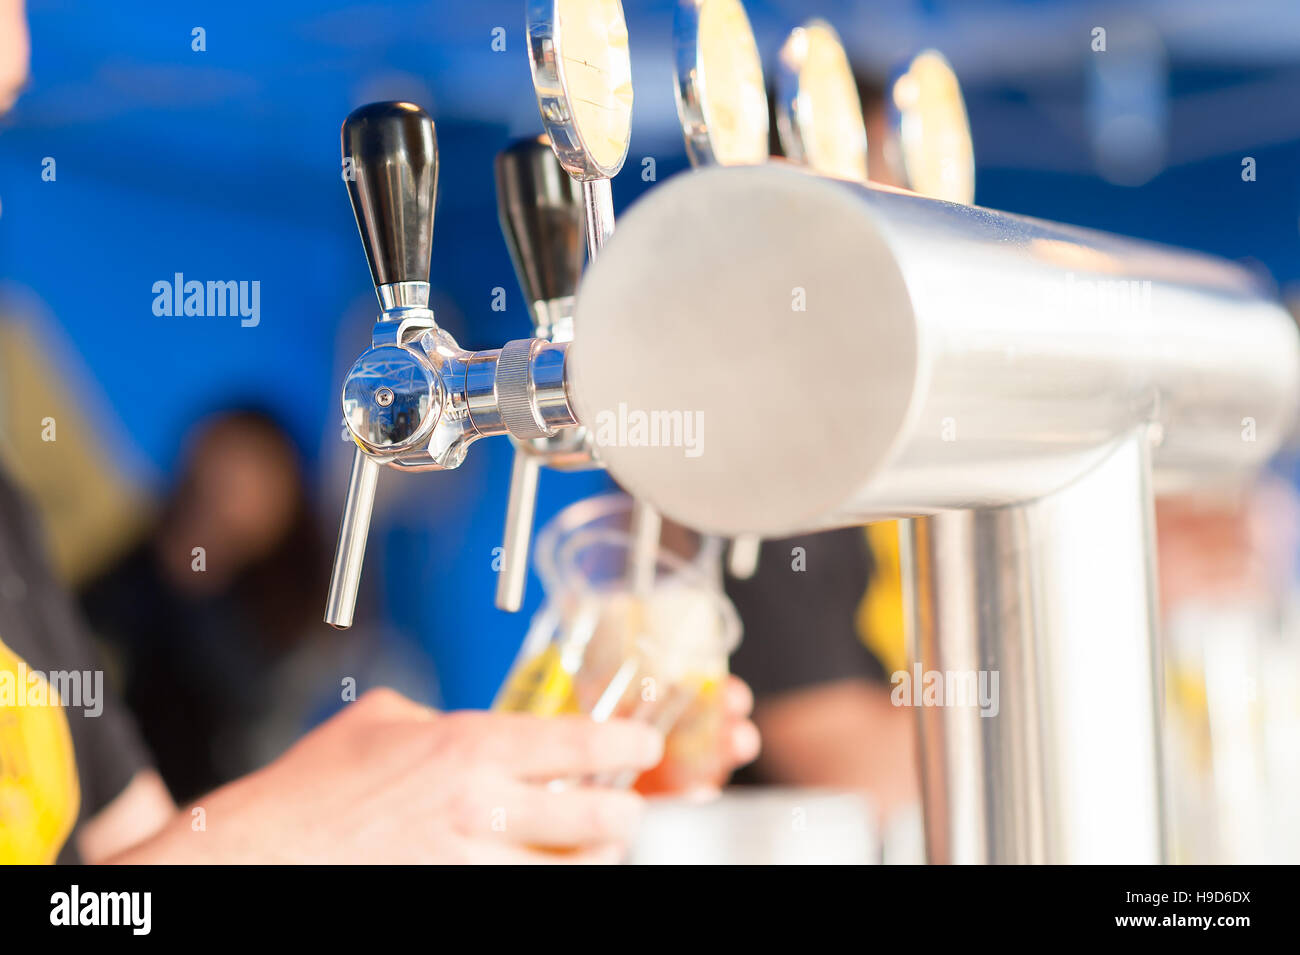 Barman hand at beer tap pouring a drought lager beer serving in a restaurant or pub. Stock Photo